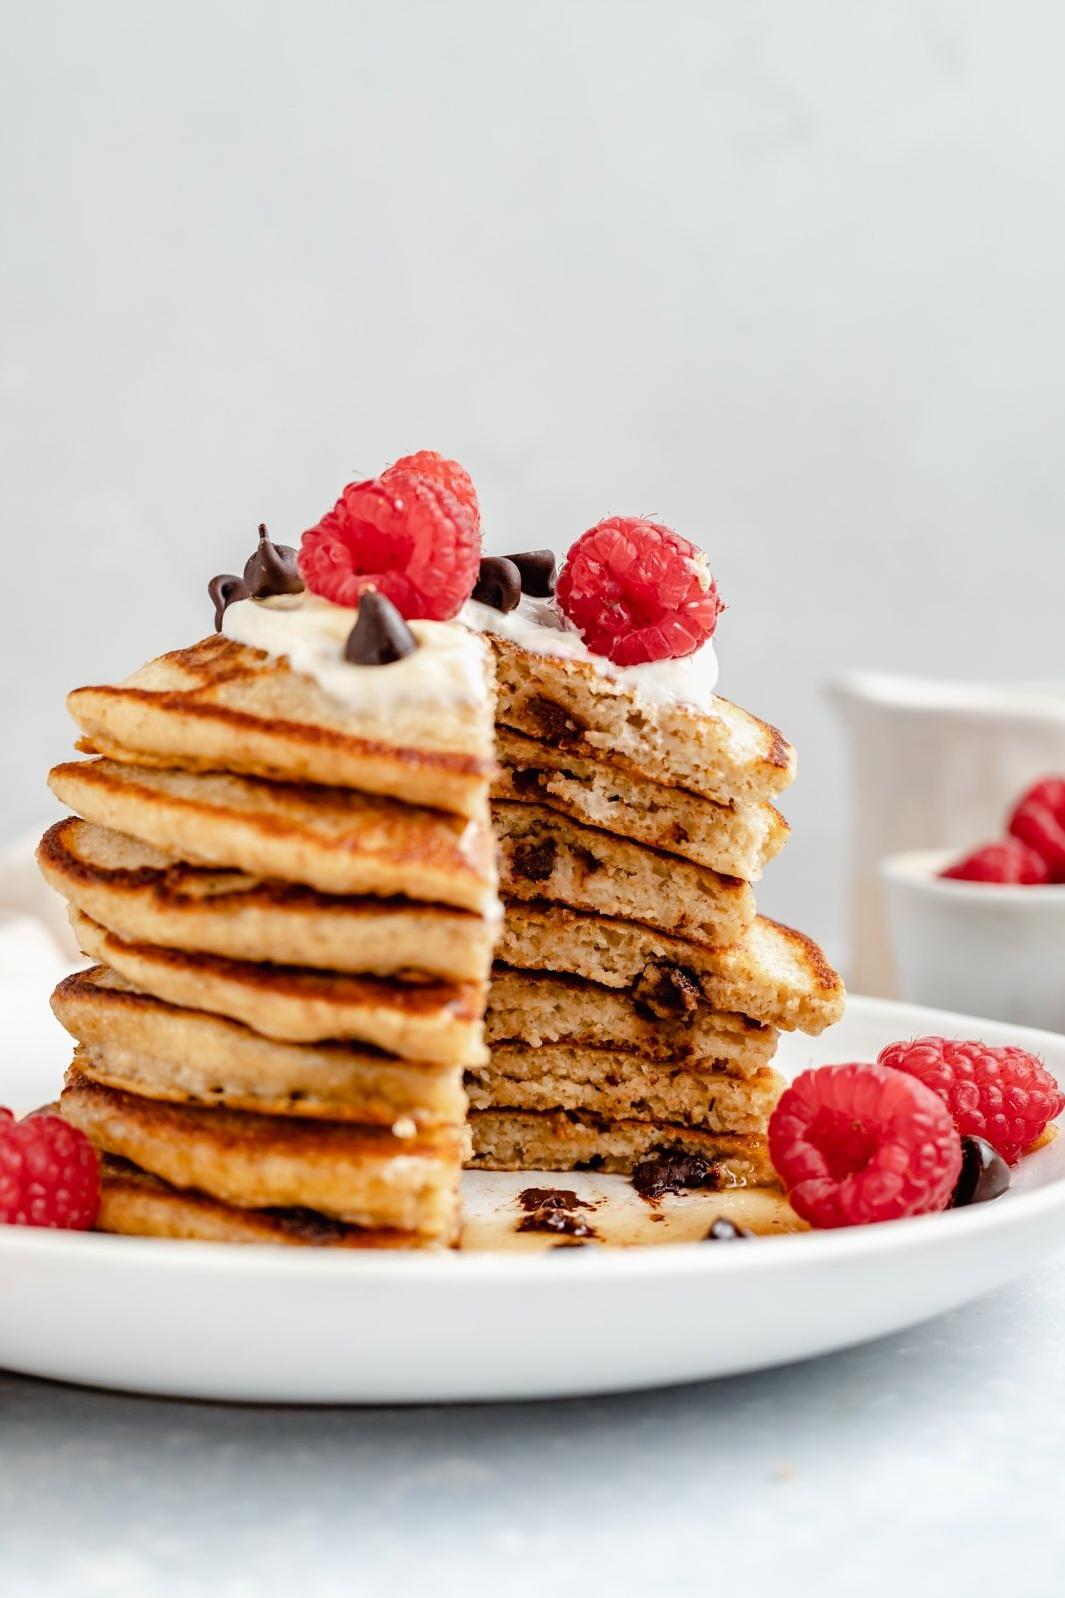  Craving pancakes but have dietary restrictions? These gluten-free and dairy-free beauties are here to save the day!